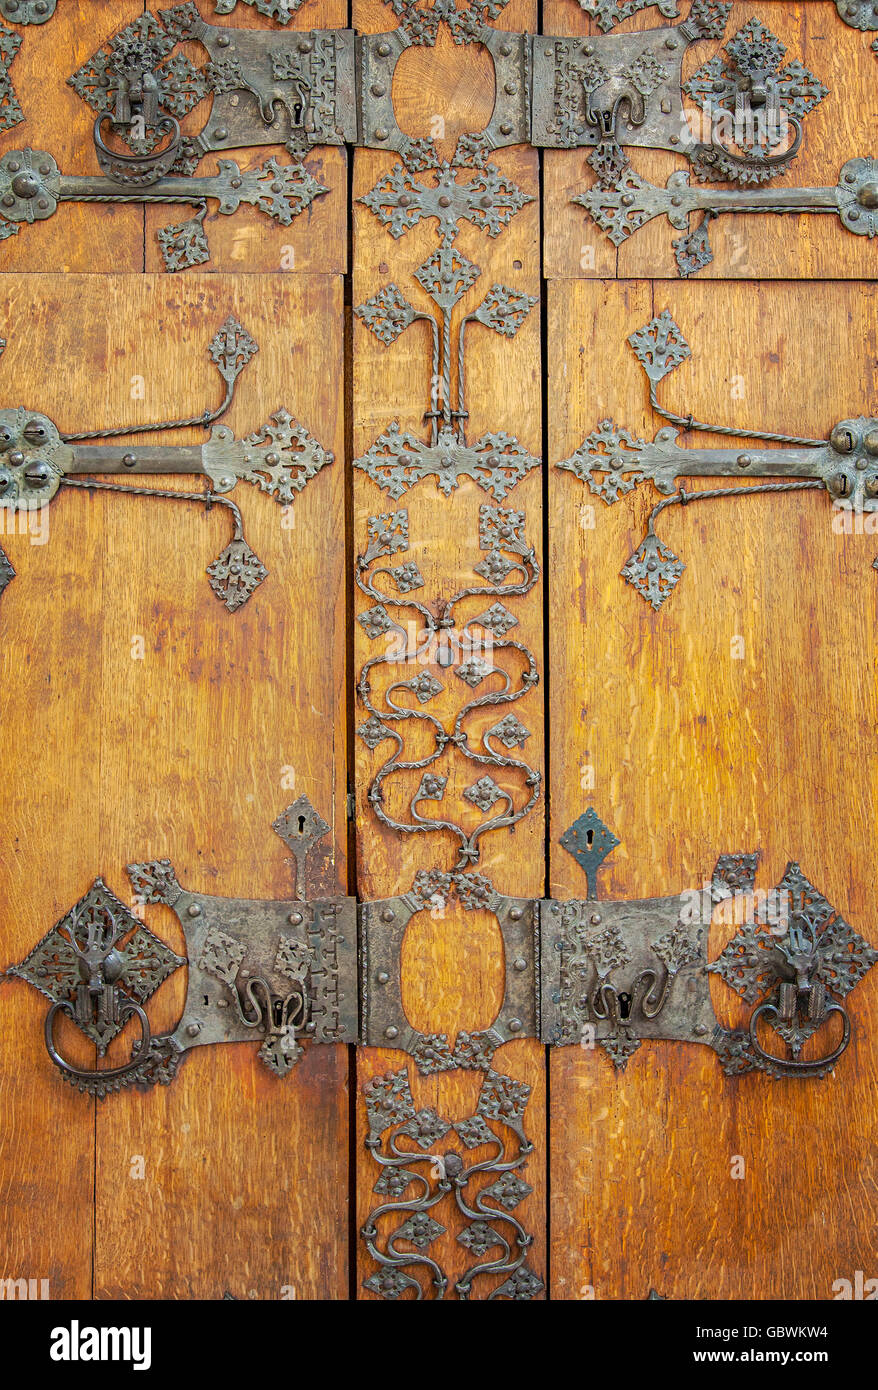 Image of the door of a vintage, medieval cupboard. Stock Photo